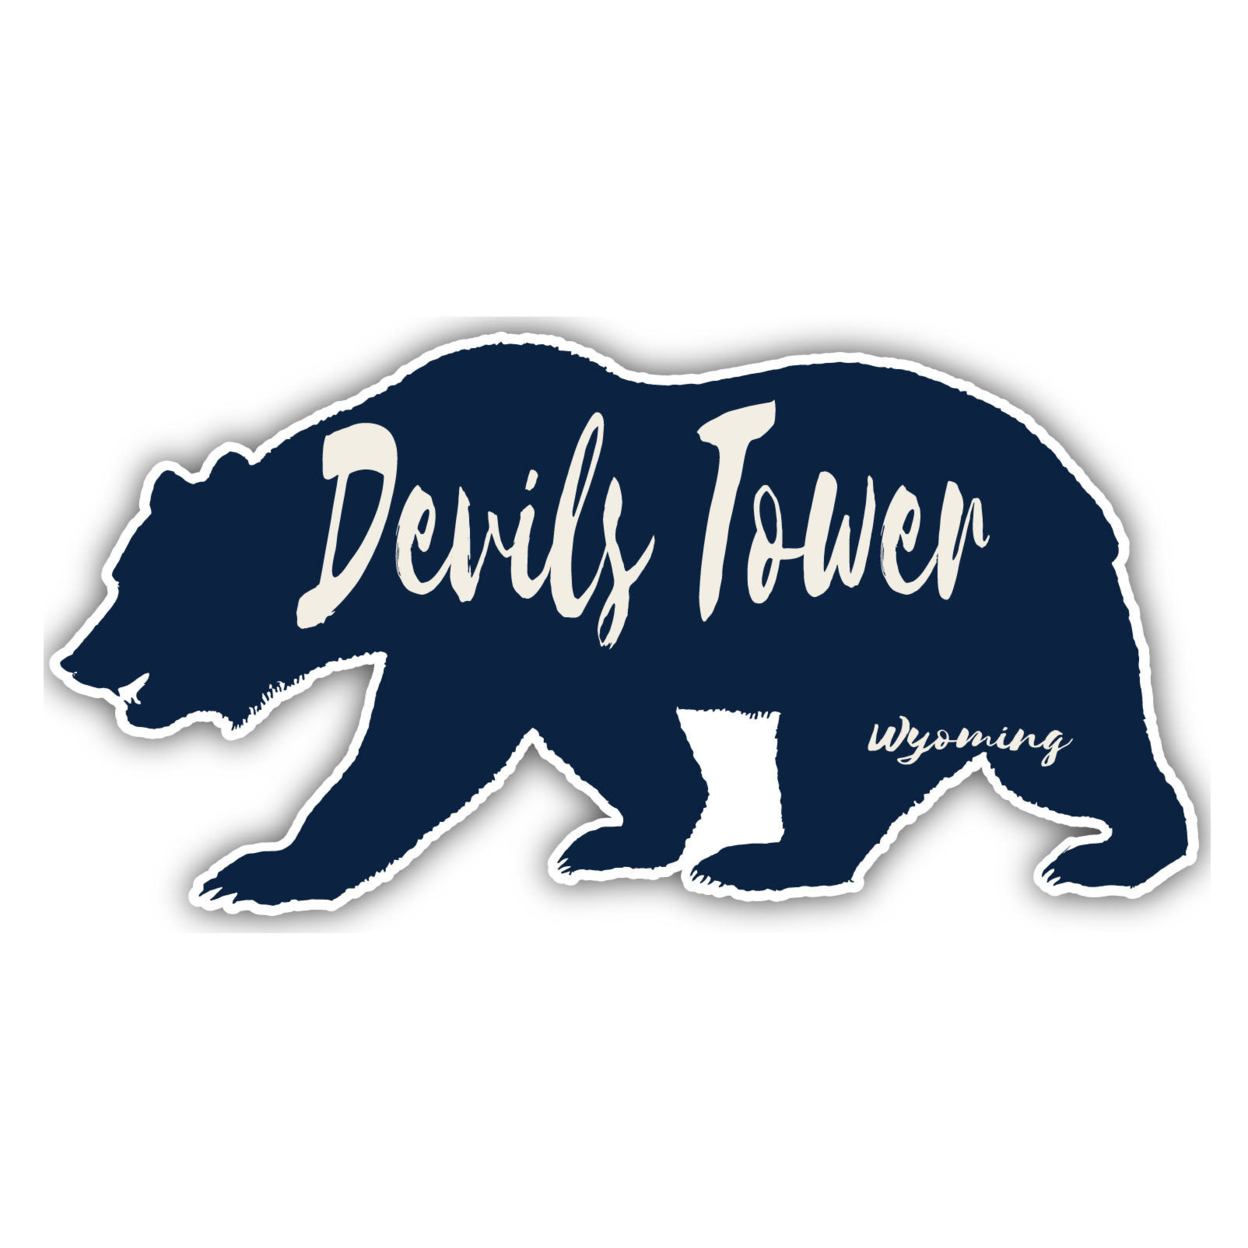 Devils Tower Wyoming Souvenir Decorative Stickers (Choose Theme And Size) - Single Unit, 12-Inch, Bear